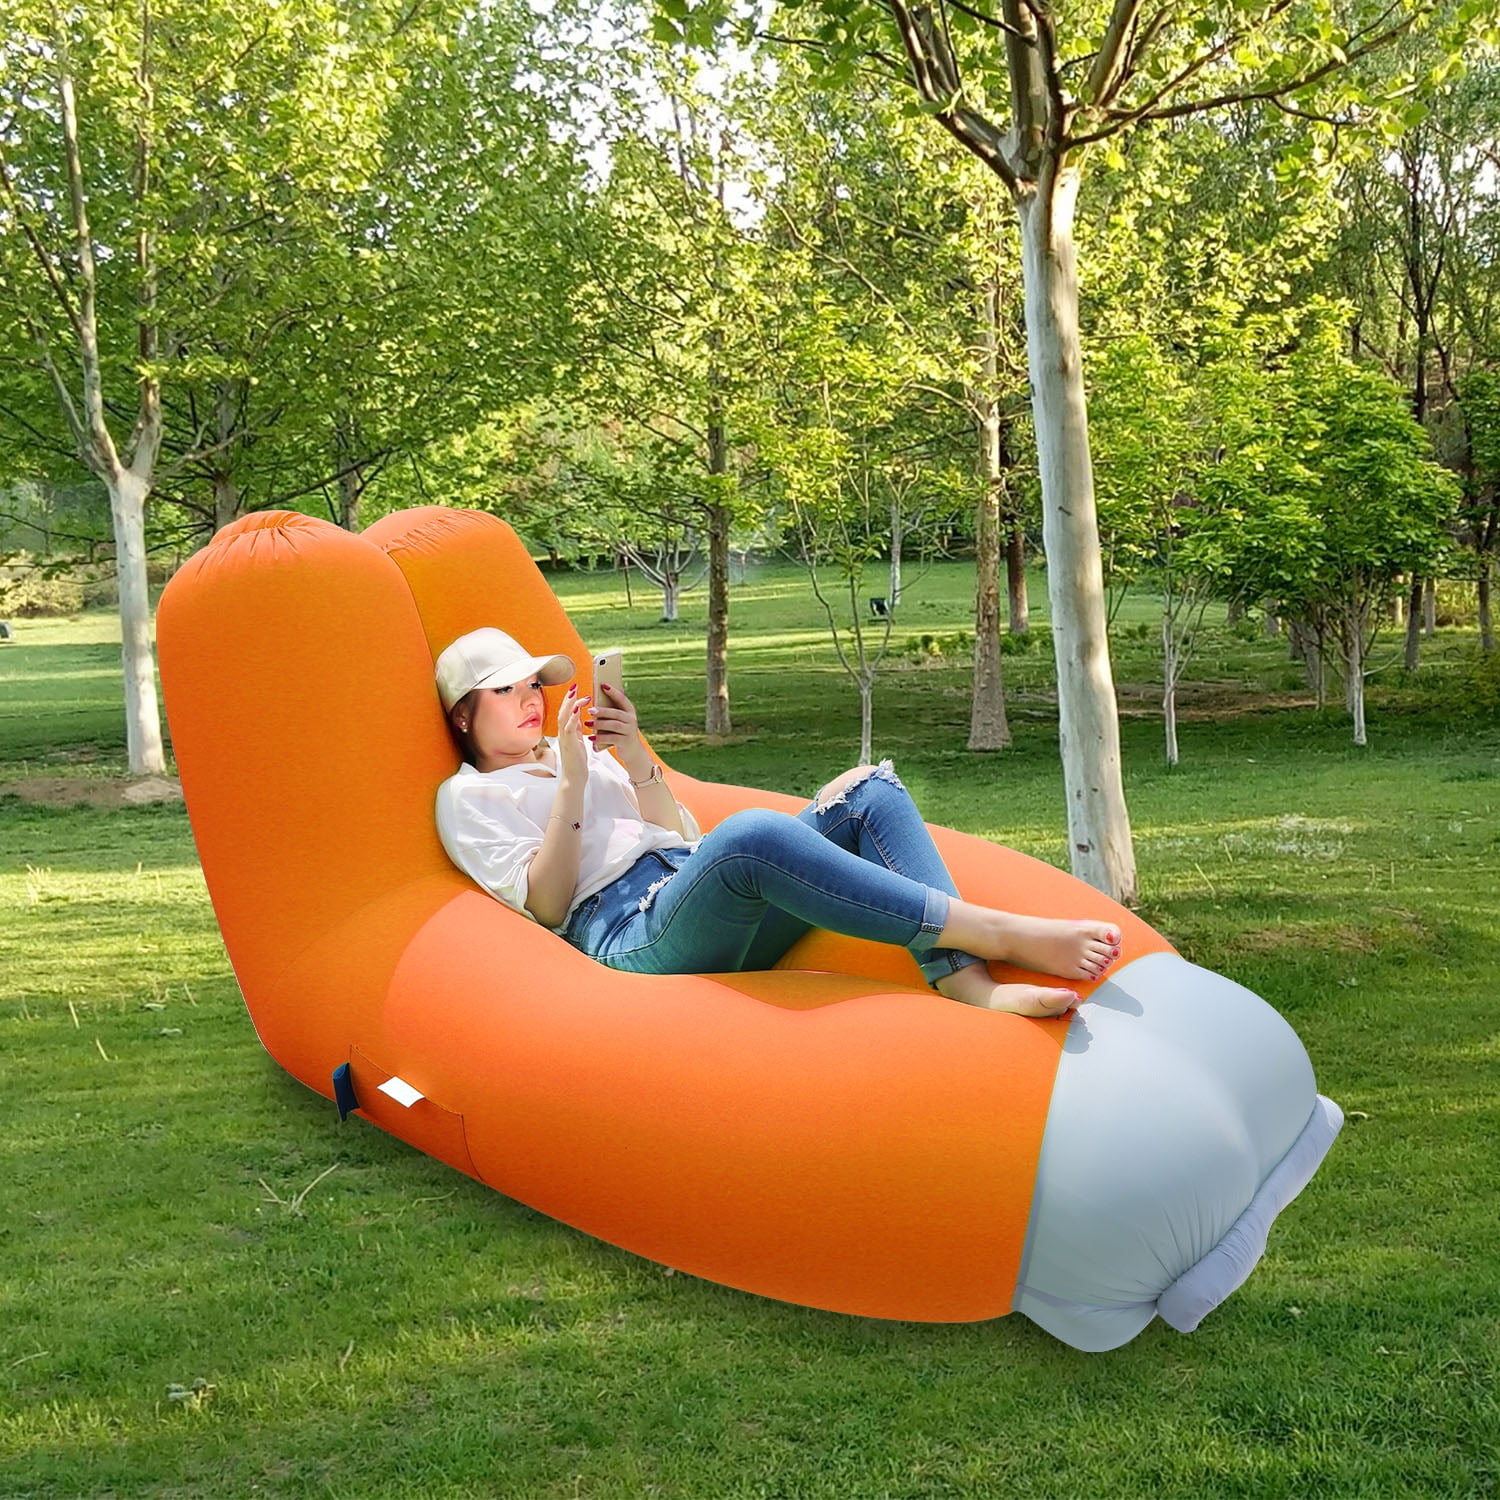 iMounTEK [Inflatable] Air Lounger Sofa/Couch Chair Seats